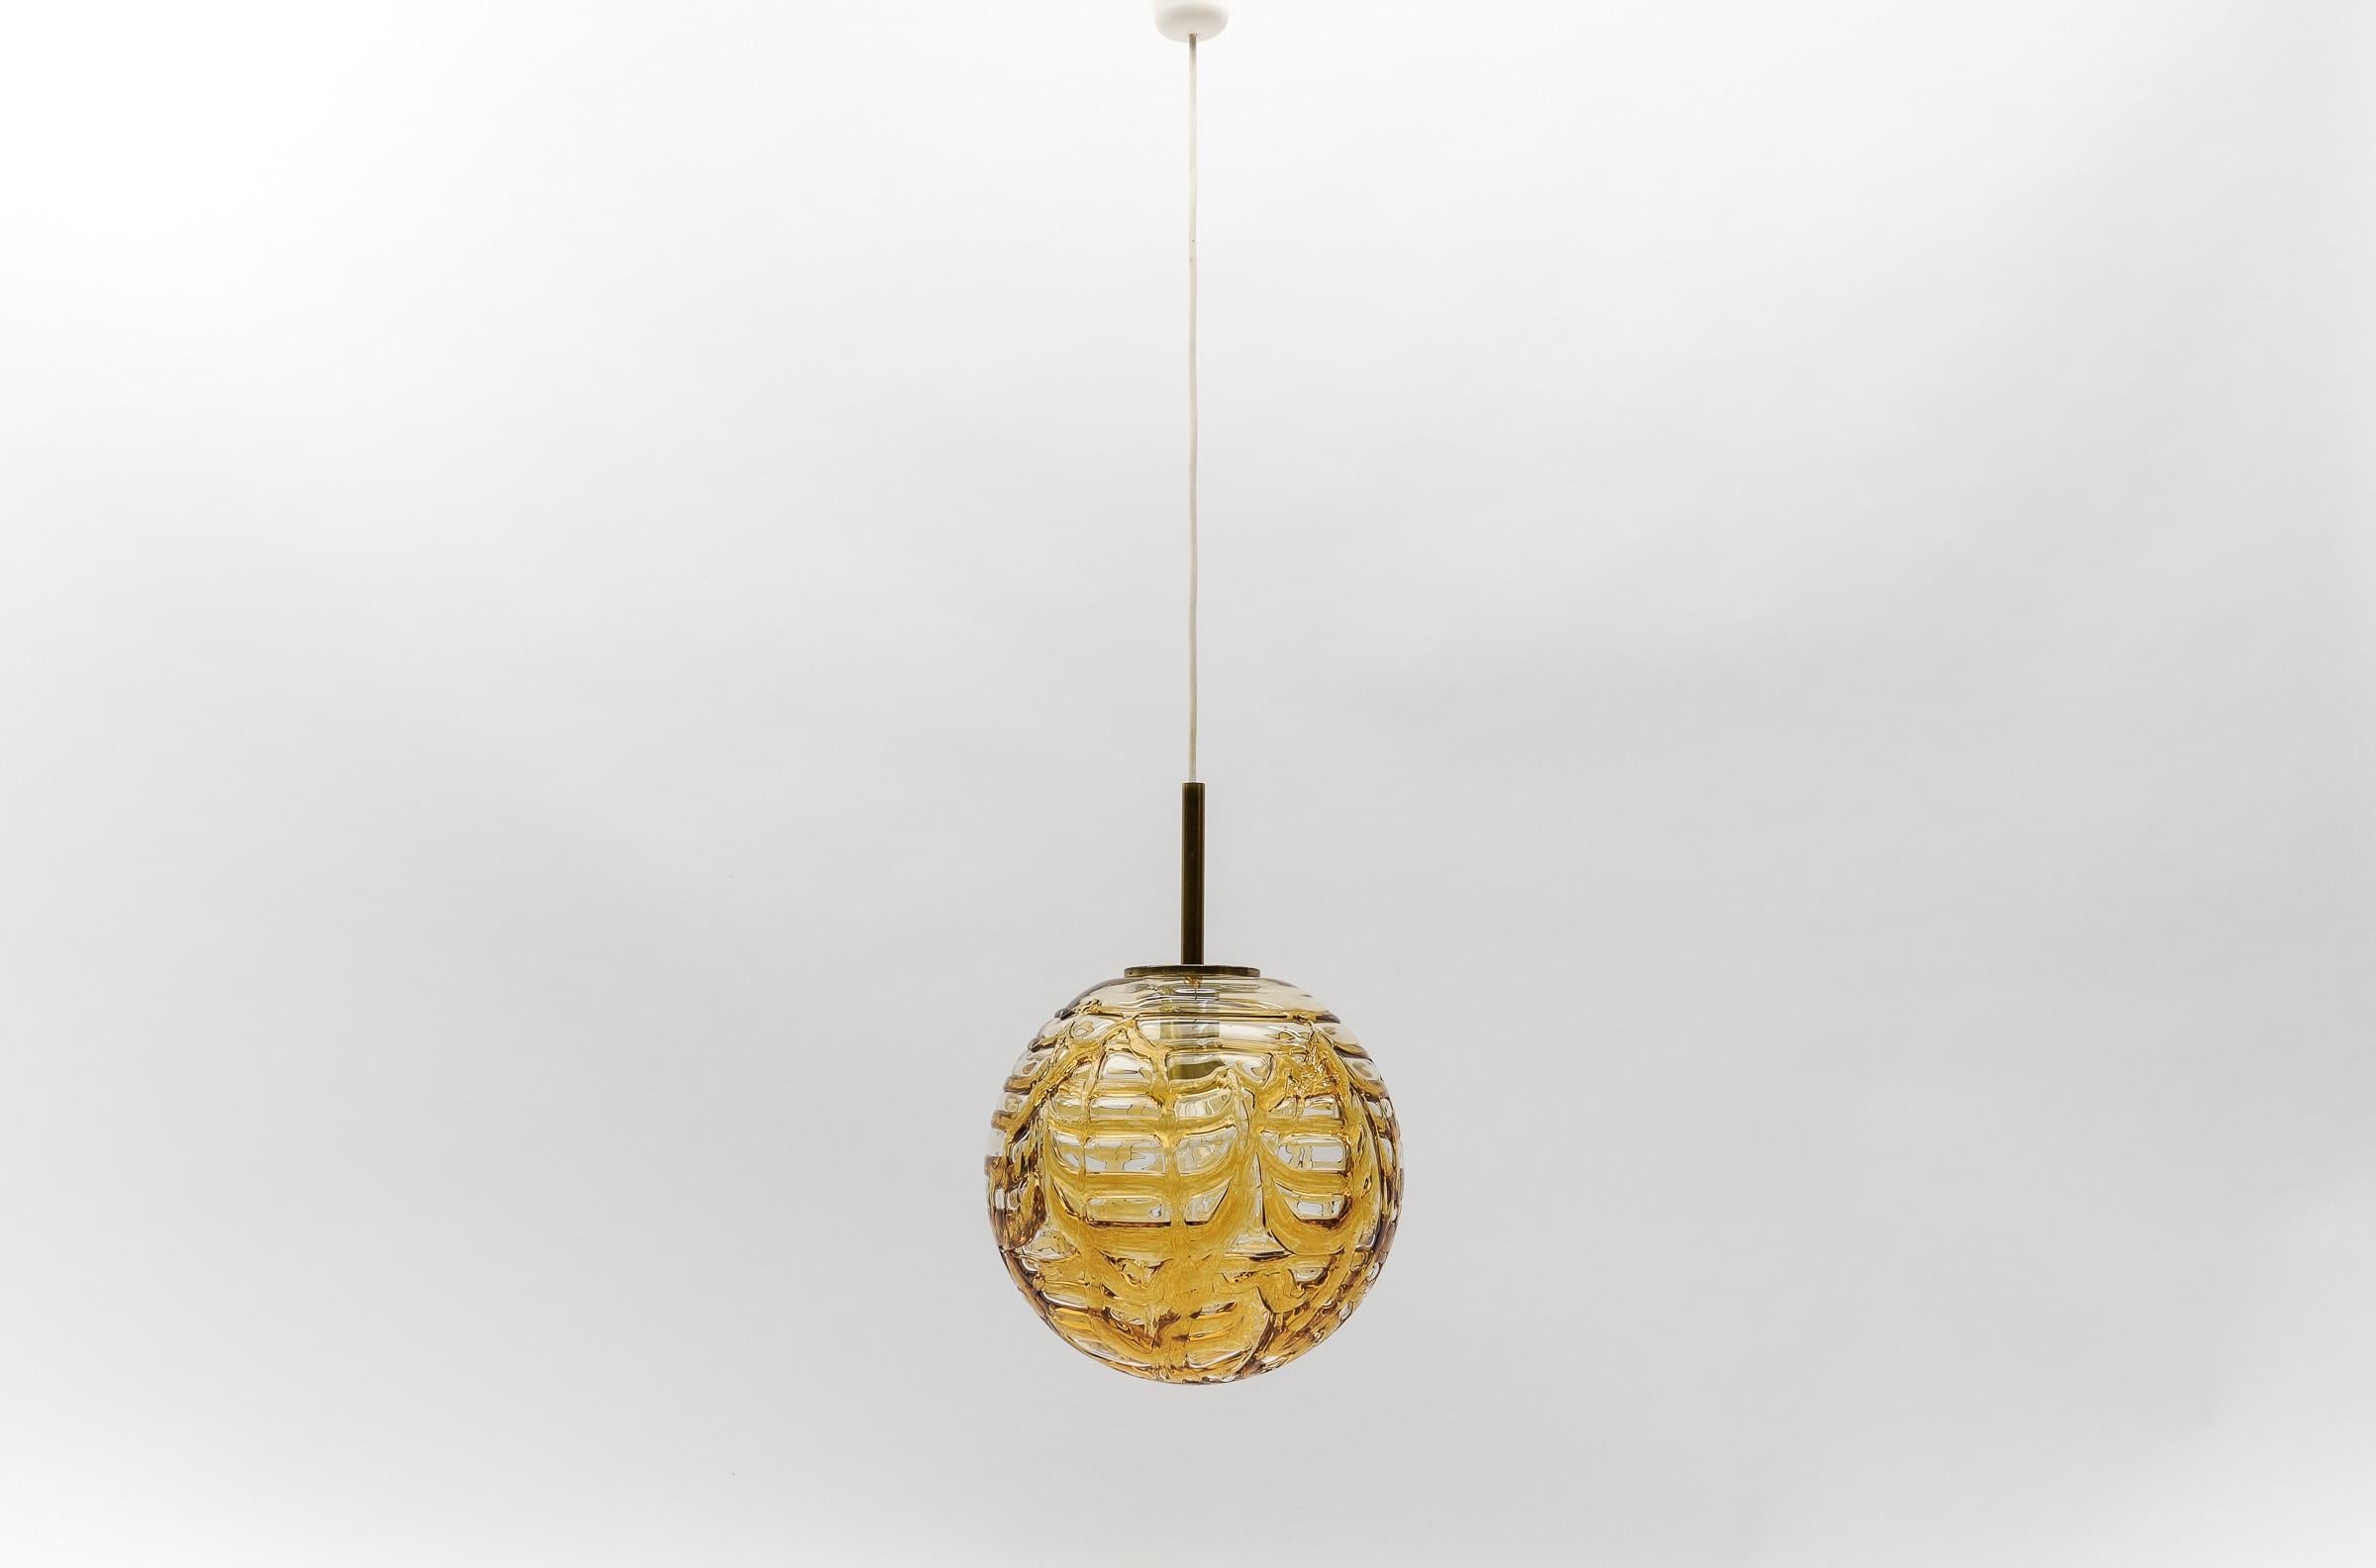 Lovely Yellow Murano Glass Ball Pendant Lamp by Doria, - 1960s Germany

Dimensions
Diameter: 11.81 in. (30 cm)
Height: 41.33 in. (105 cm)

One E27 socket. Works with 220V and 110V.

Our lamps are checked, cleaned and are suitable for use in the USA.